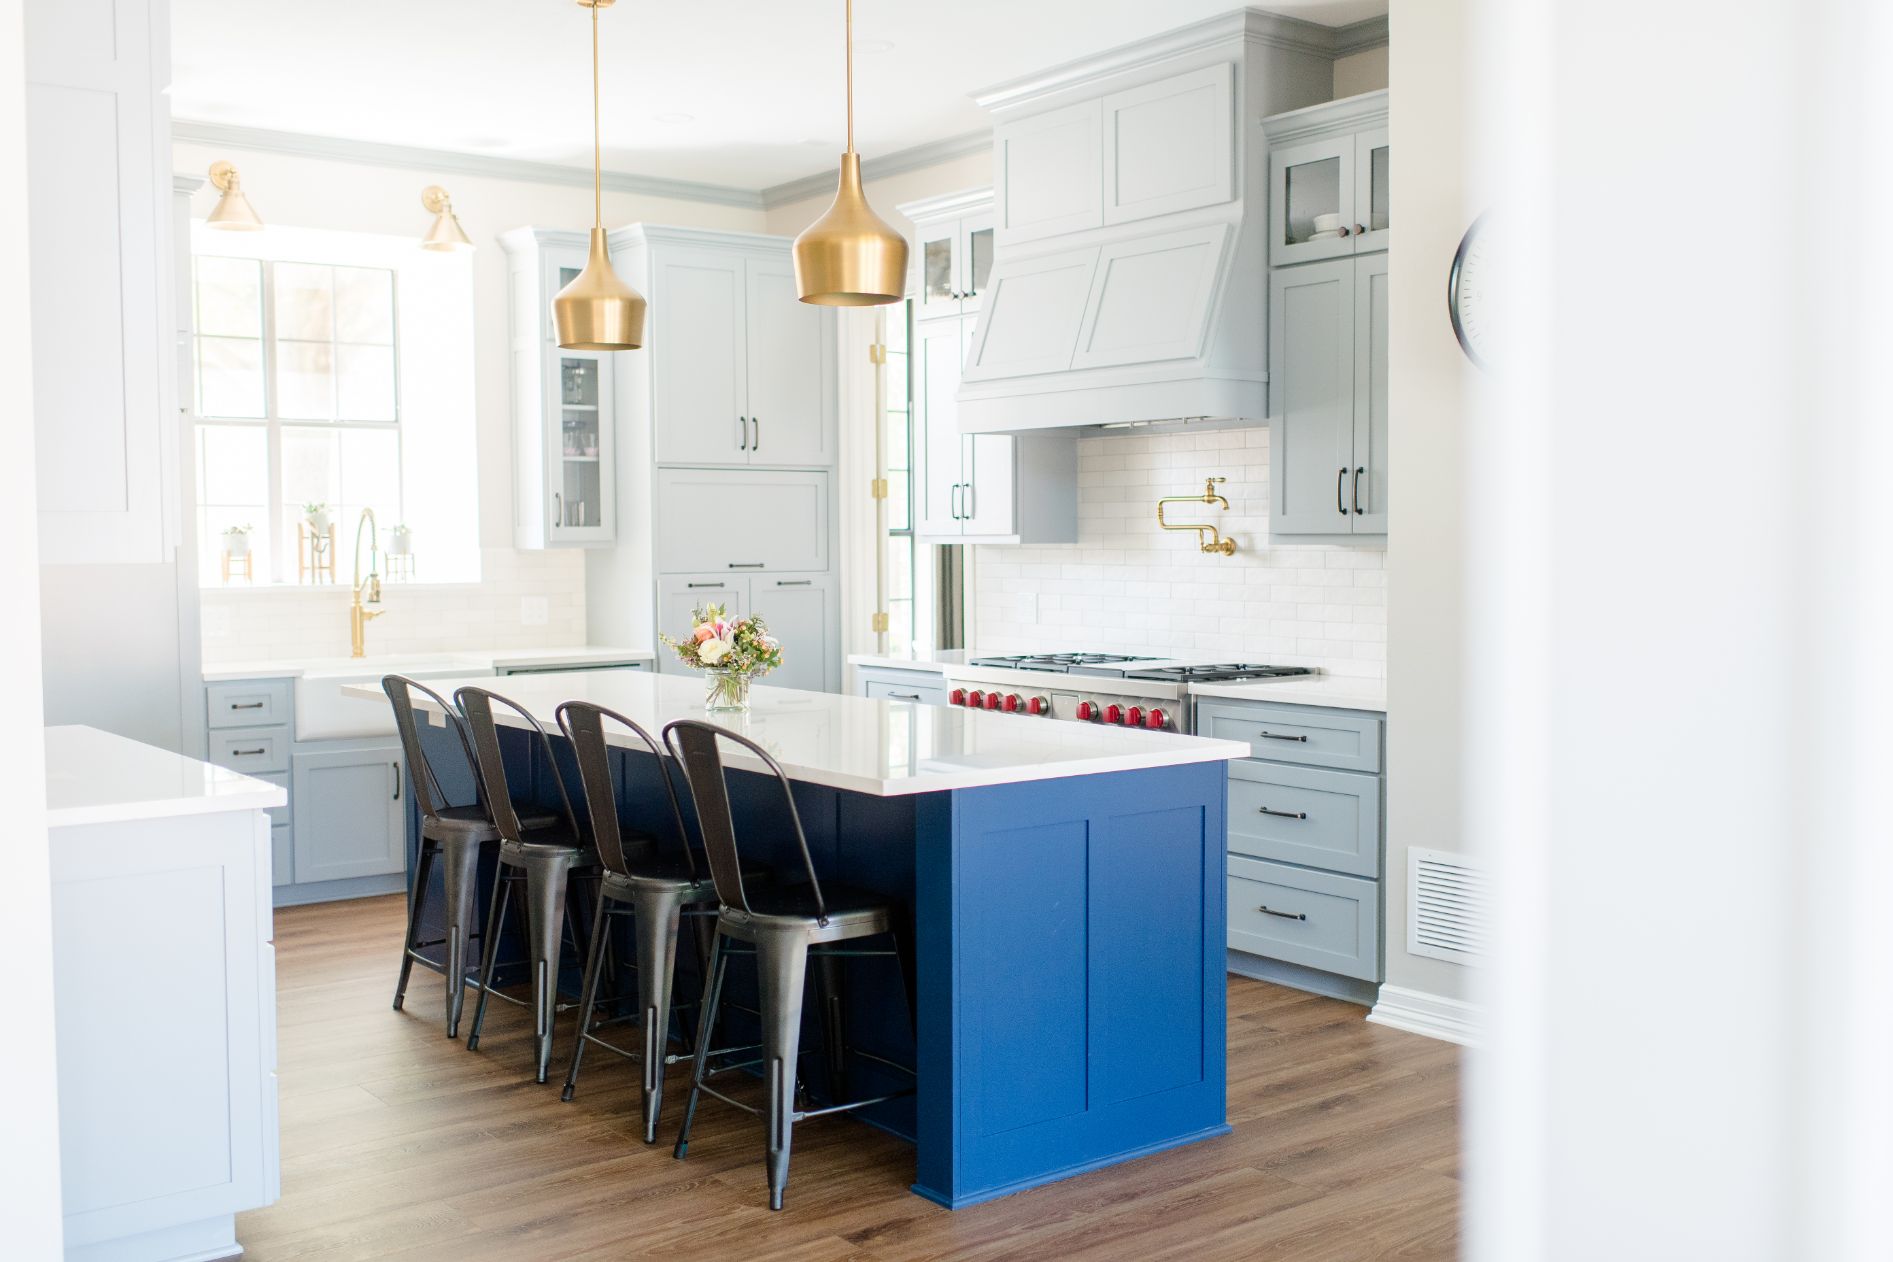 Transitional Kitchen with Blue Wood Under Glossy White Countertop